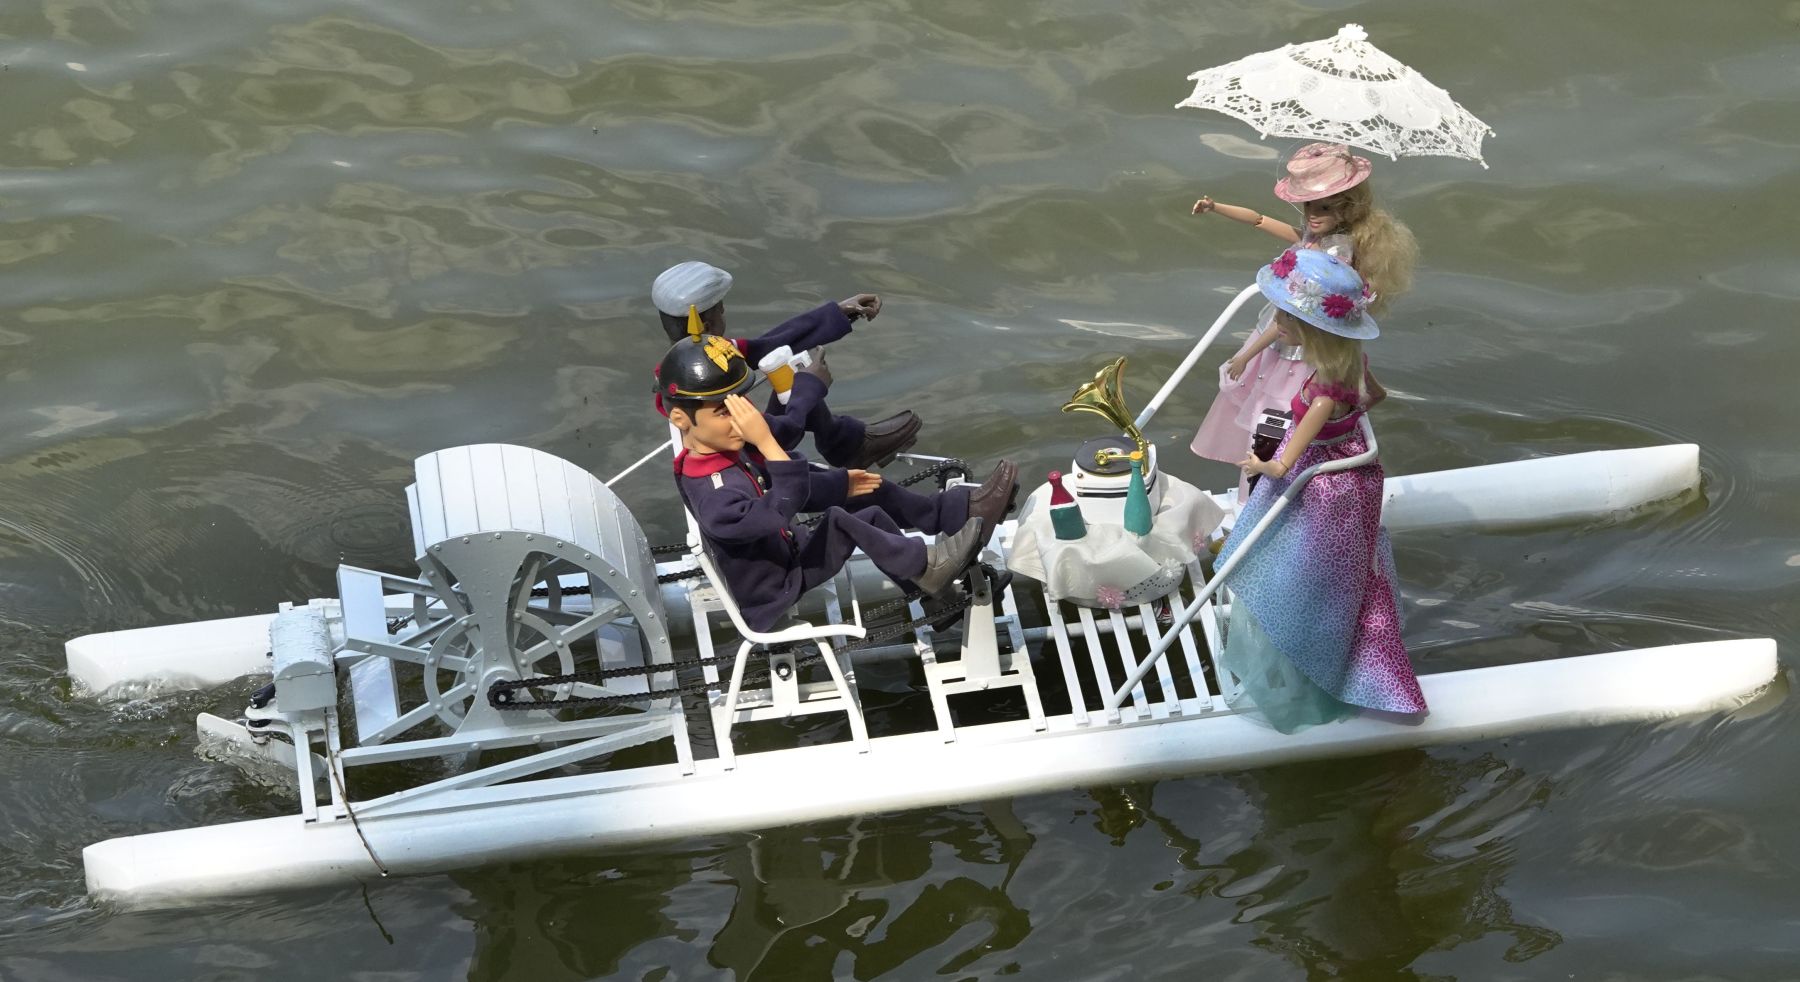 RC pedal boat with dolls